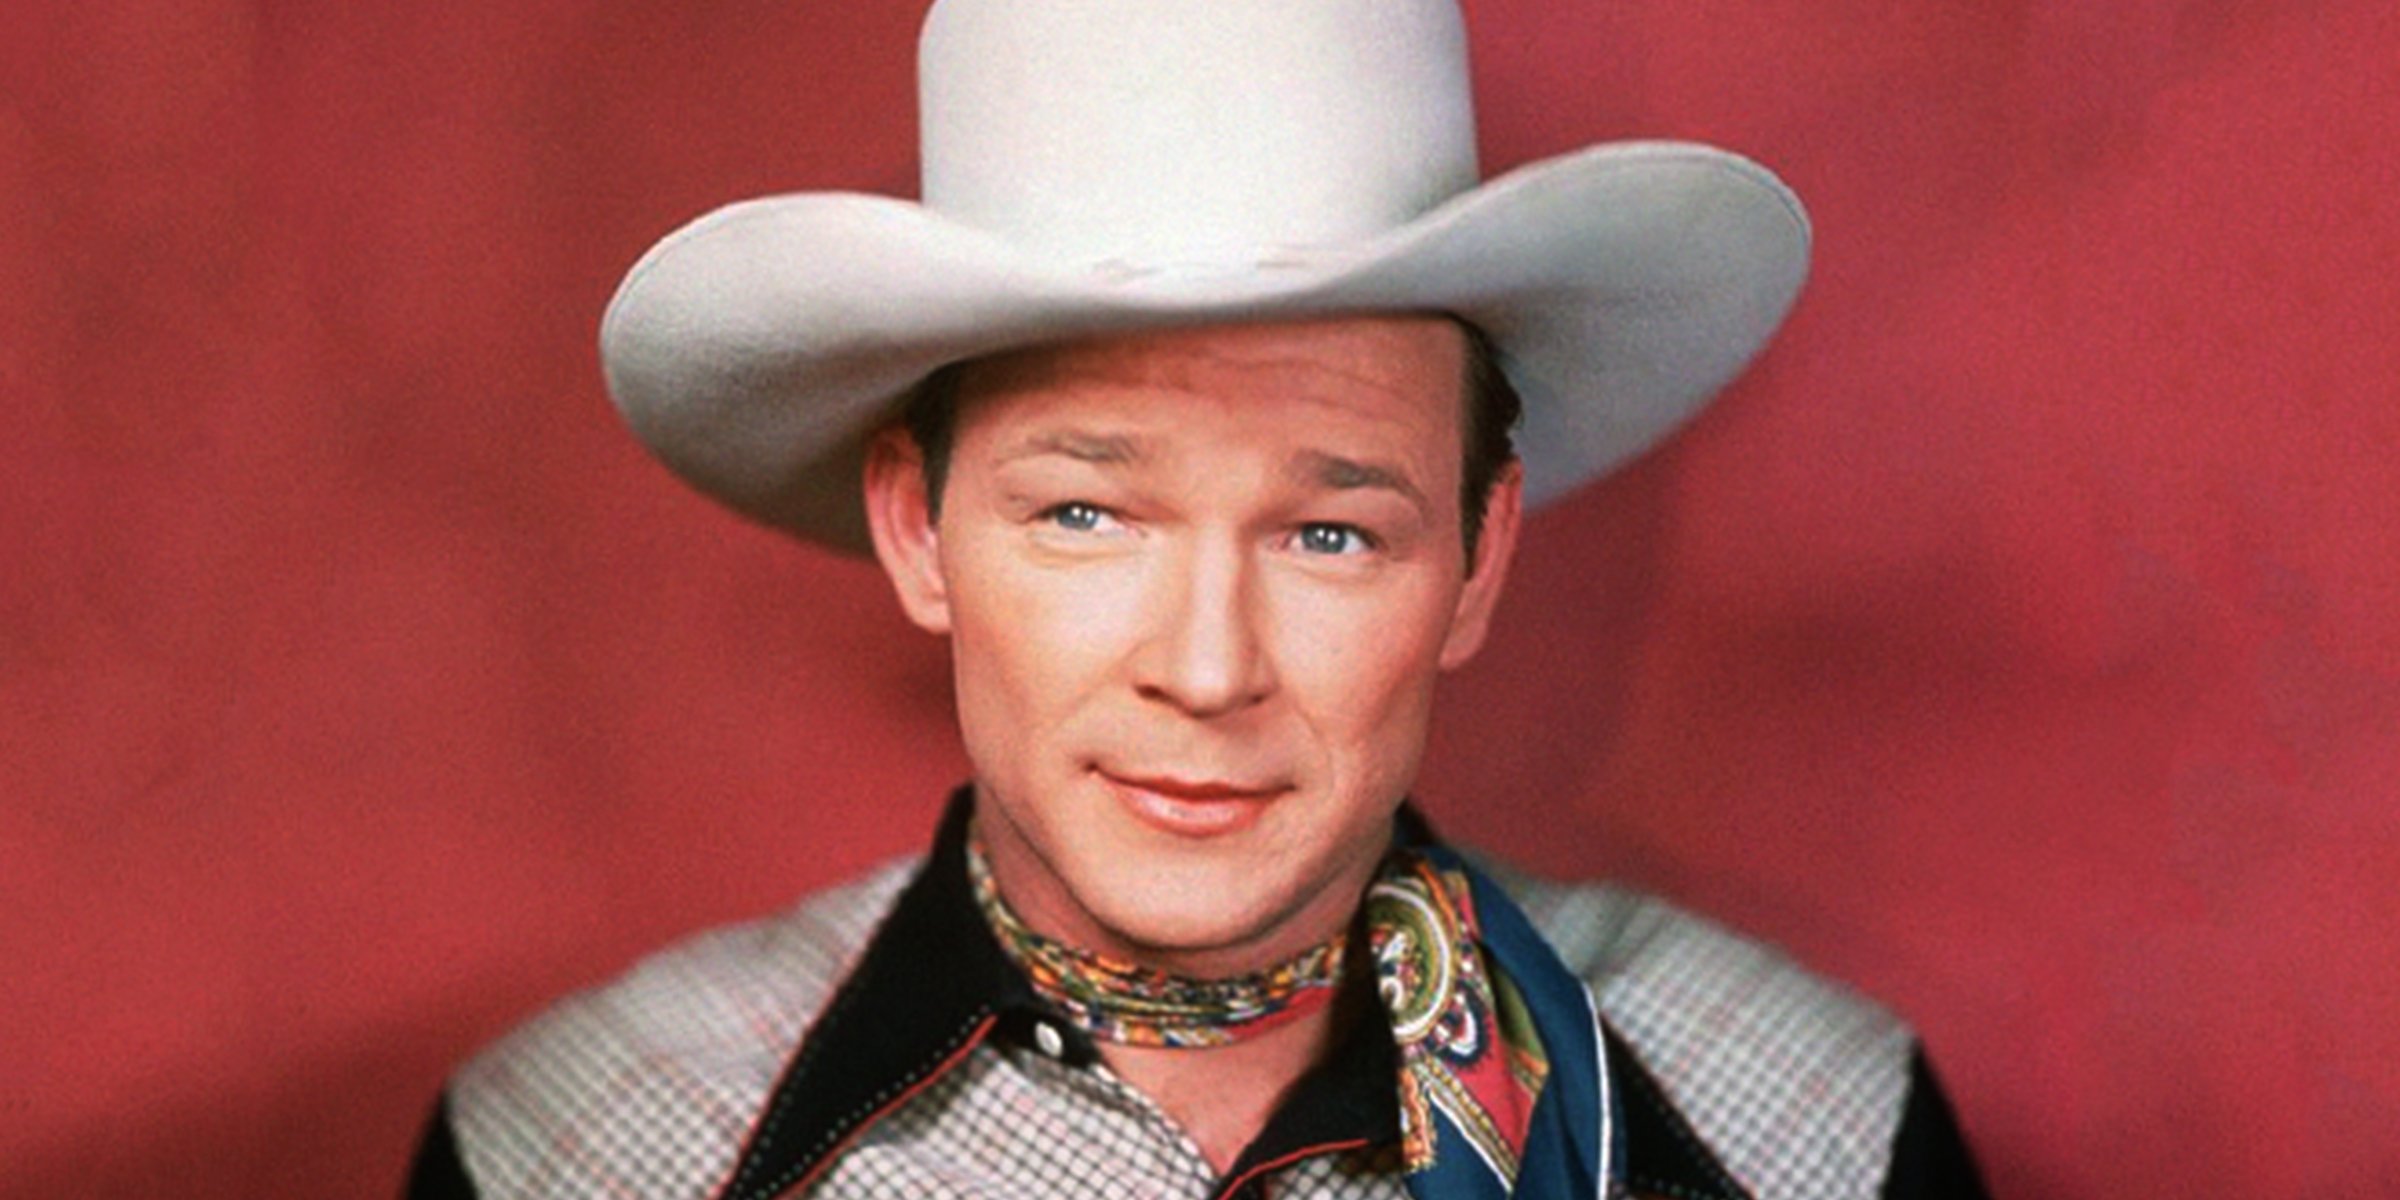 Roy Rogers' Adopted Daughter Felt His Late Biological Child Was the Reason She Got to Be Part of His Family